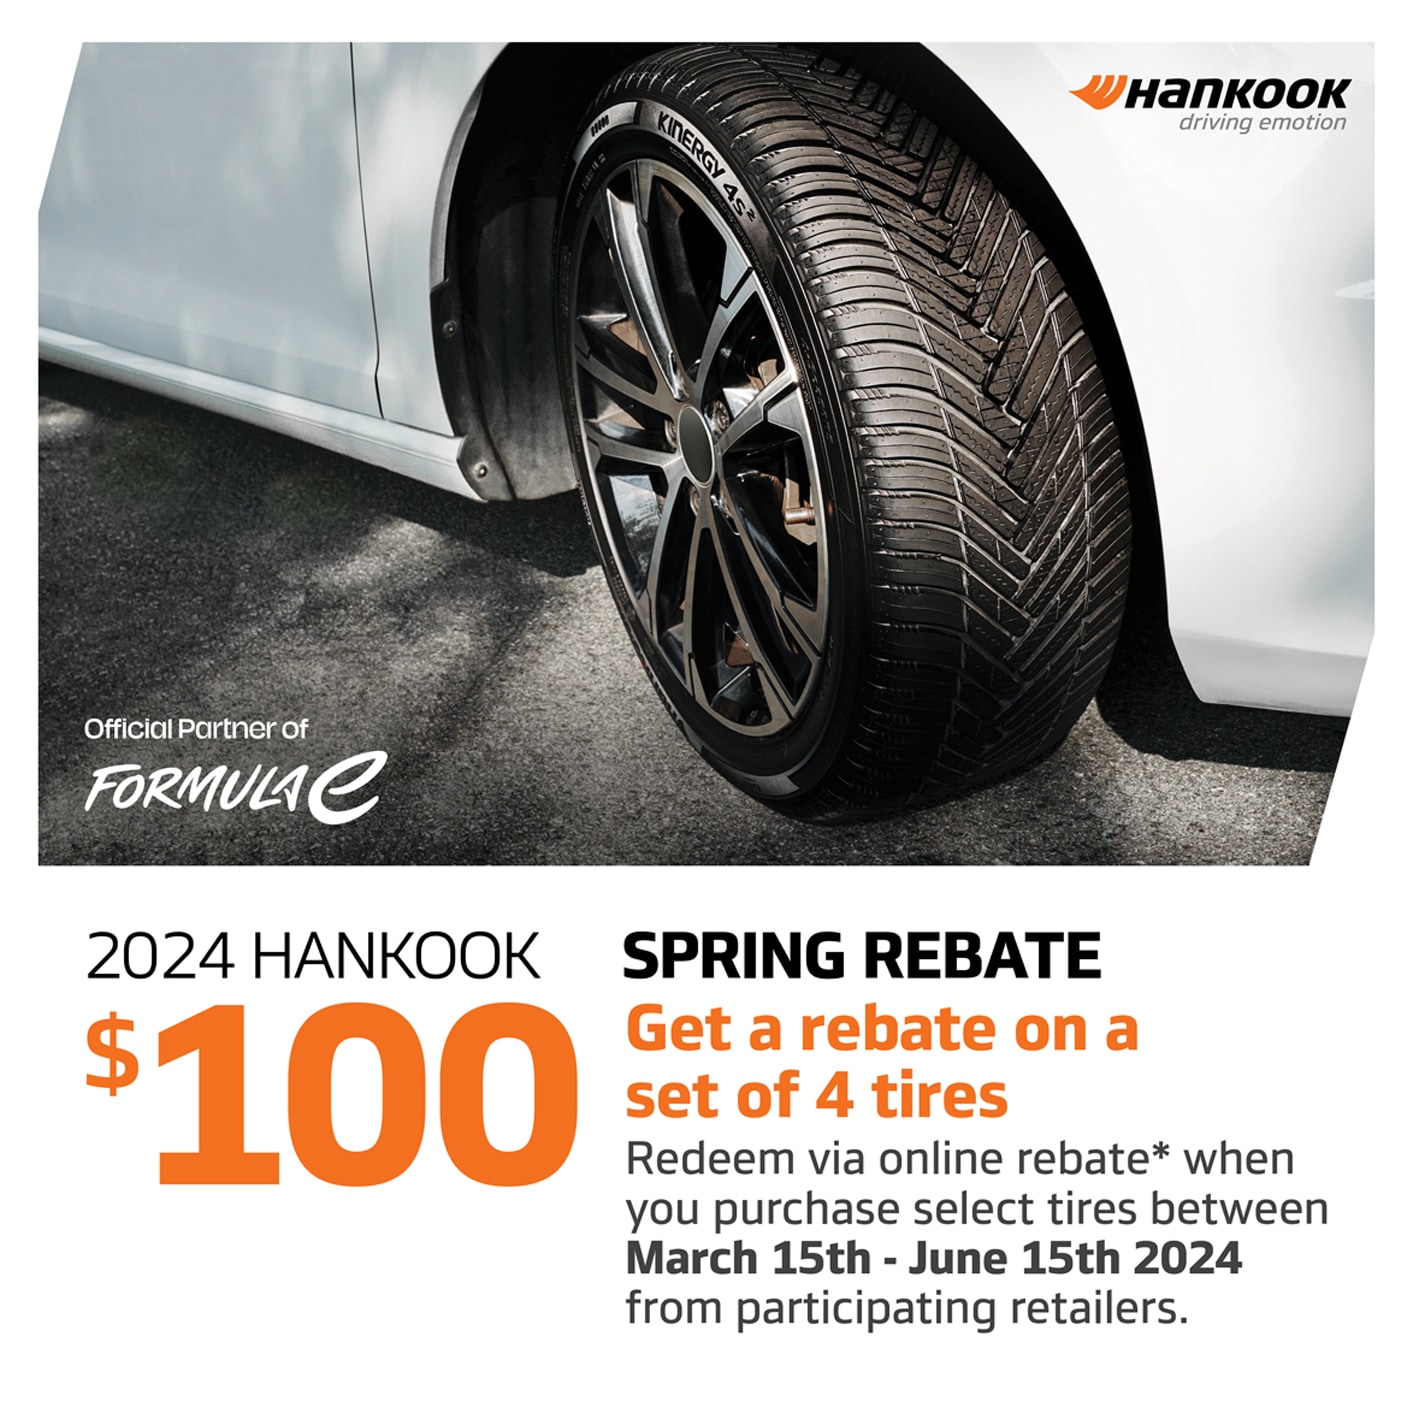 Hankook Tire Canada Offers Additional Savings with 2024 Spring Rebate  